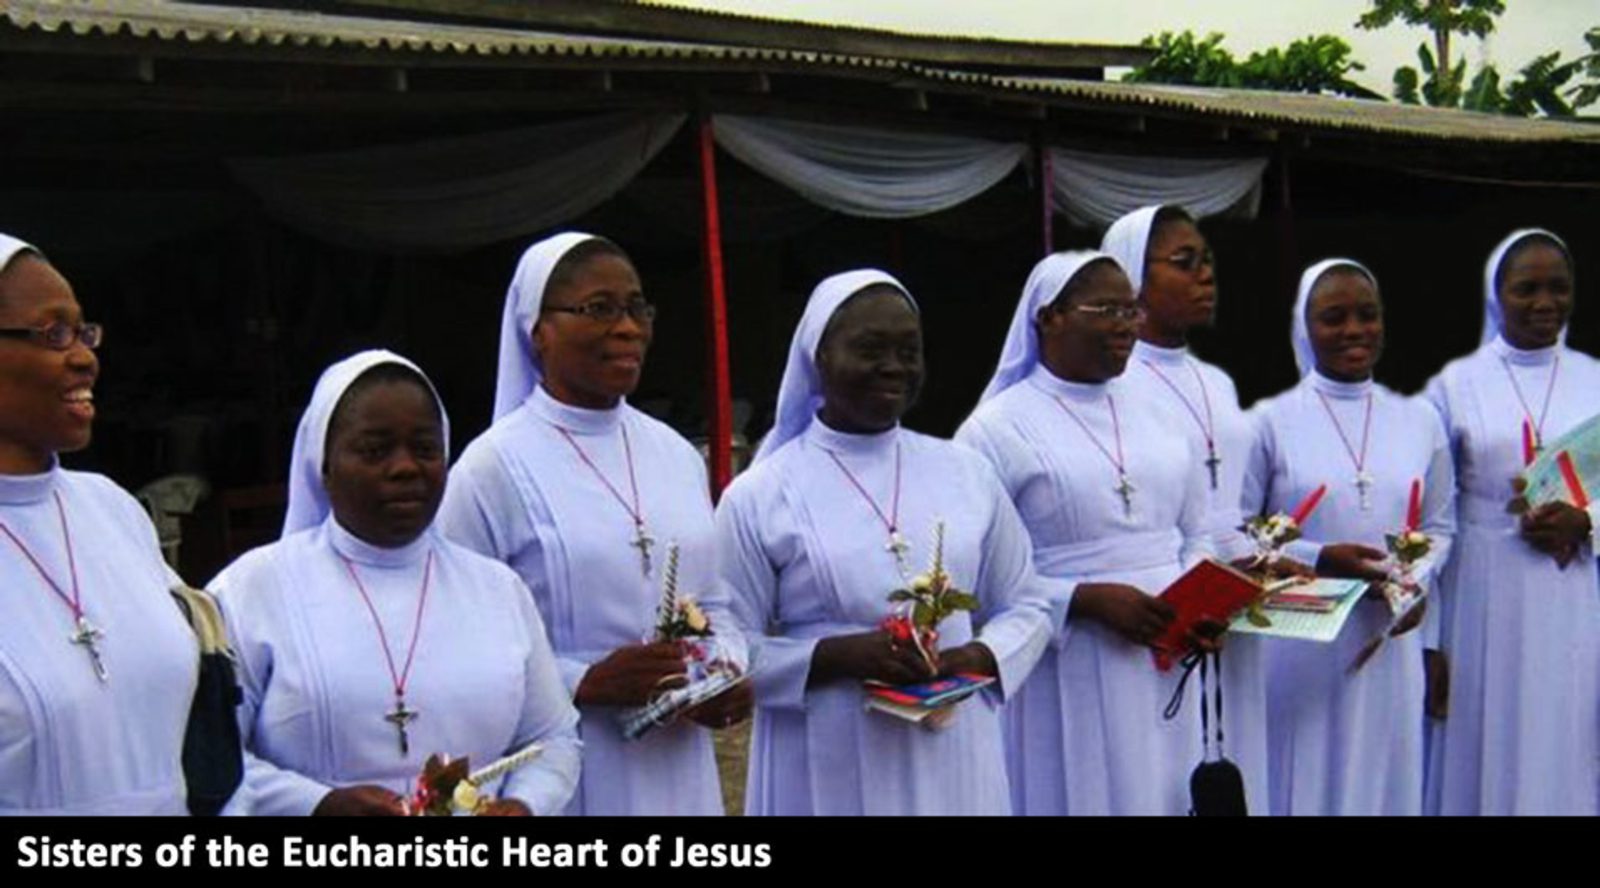 20180115-Sisters-of-the-Eucharistic-Heart-of-Jesus